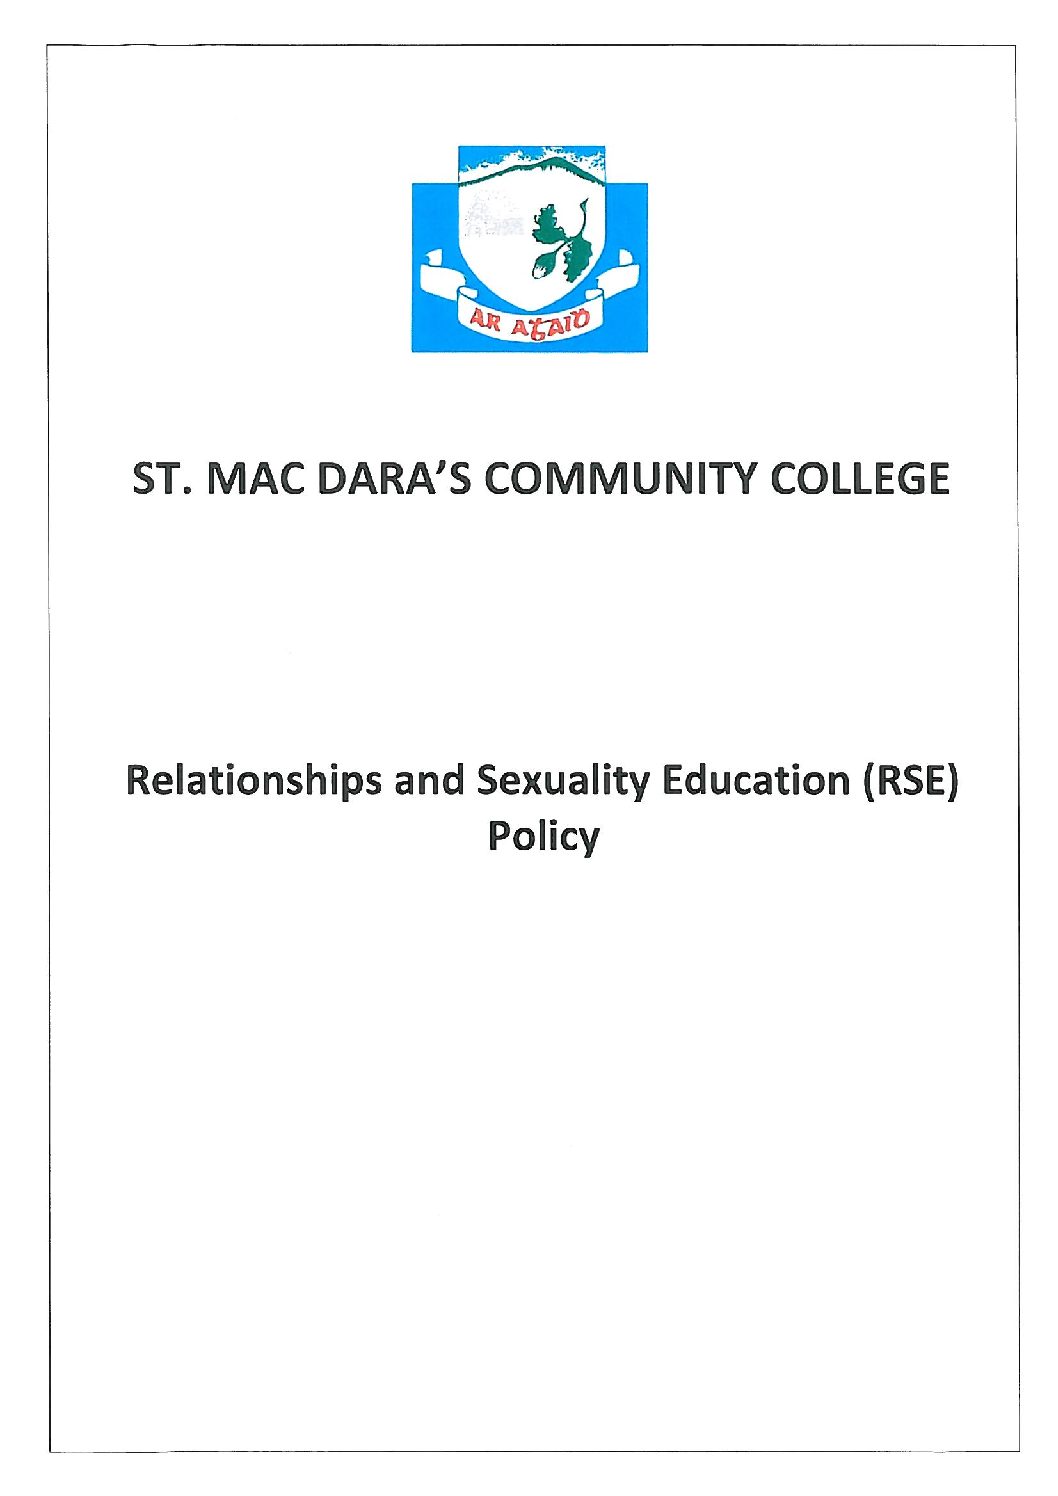 Relationships and Sexuality Education (RSE) Policy